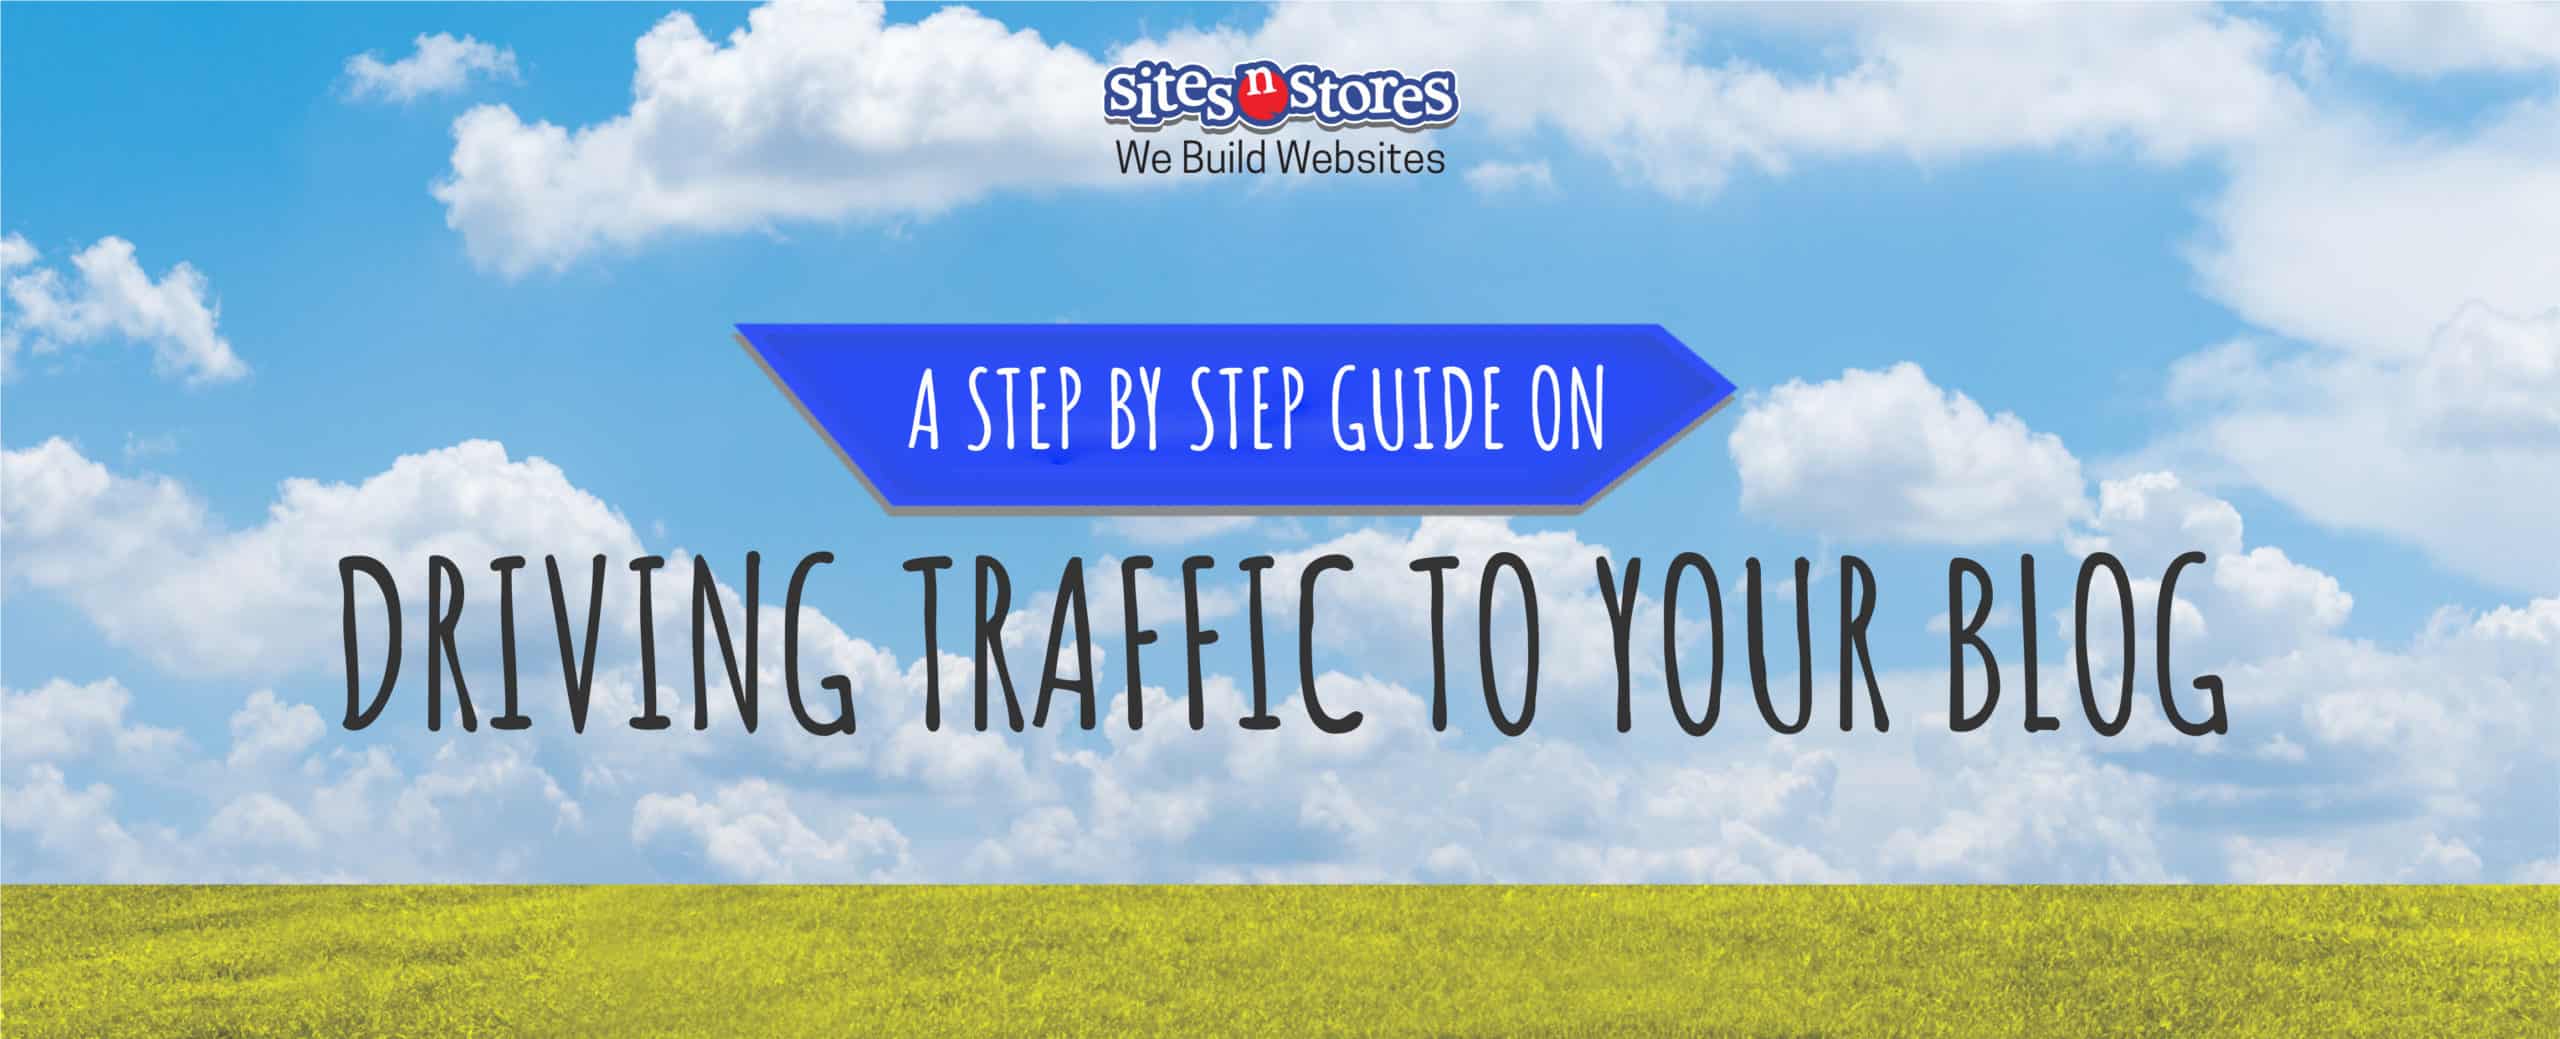 A Step by Step Guide on Driving Traffic to Your Blog